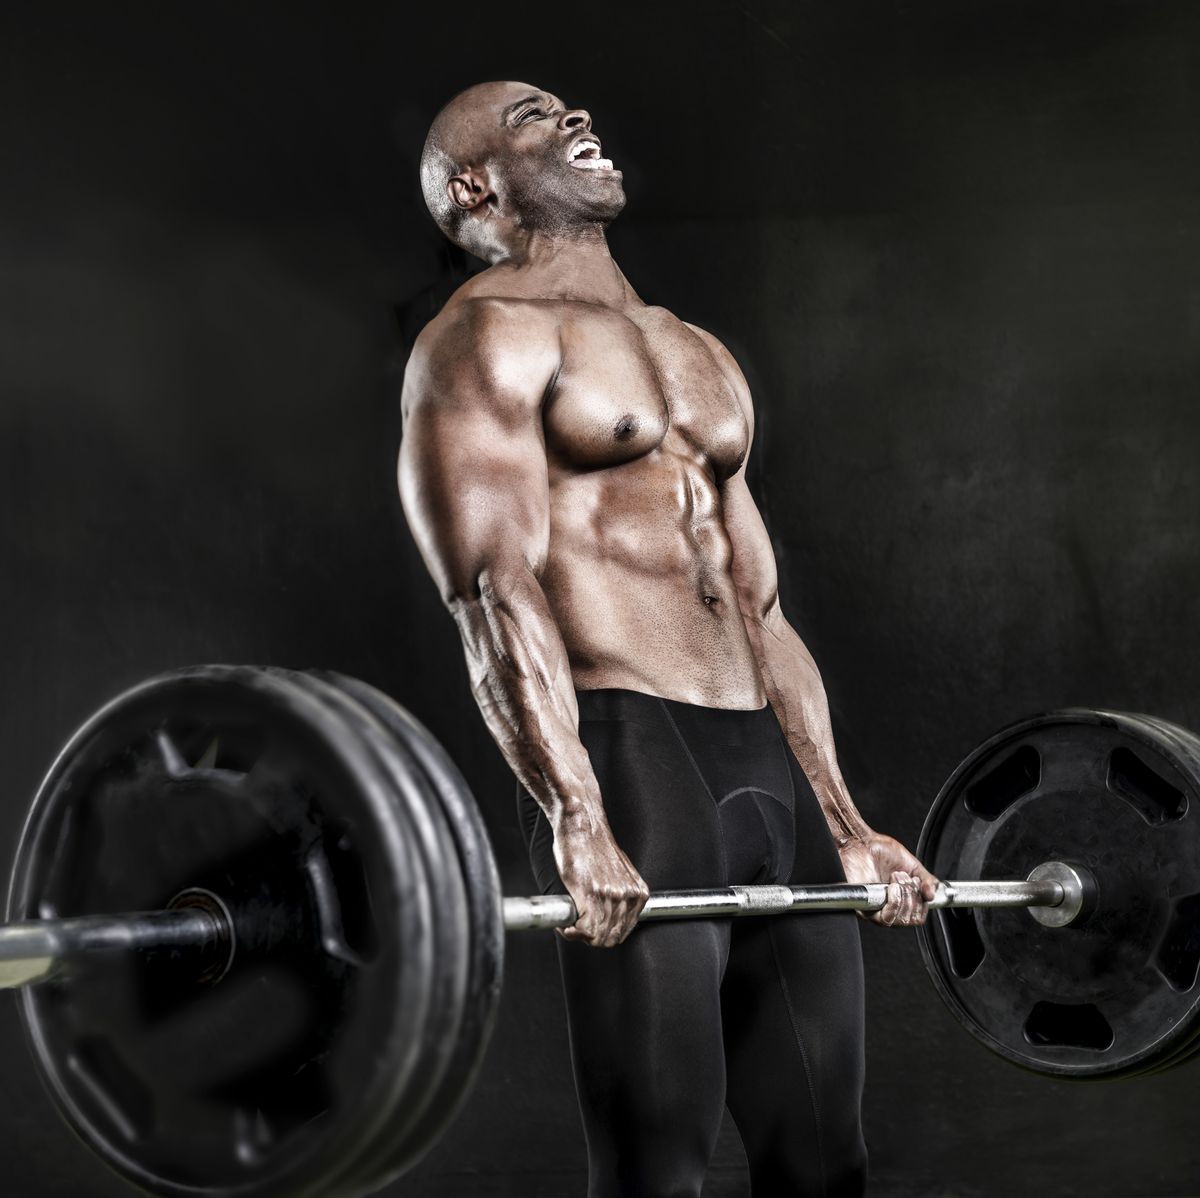 Athlete lifting heavy weights